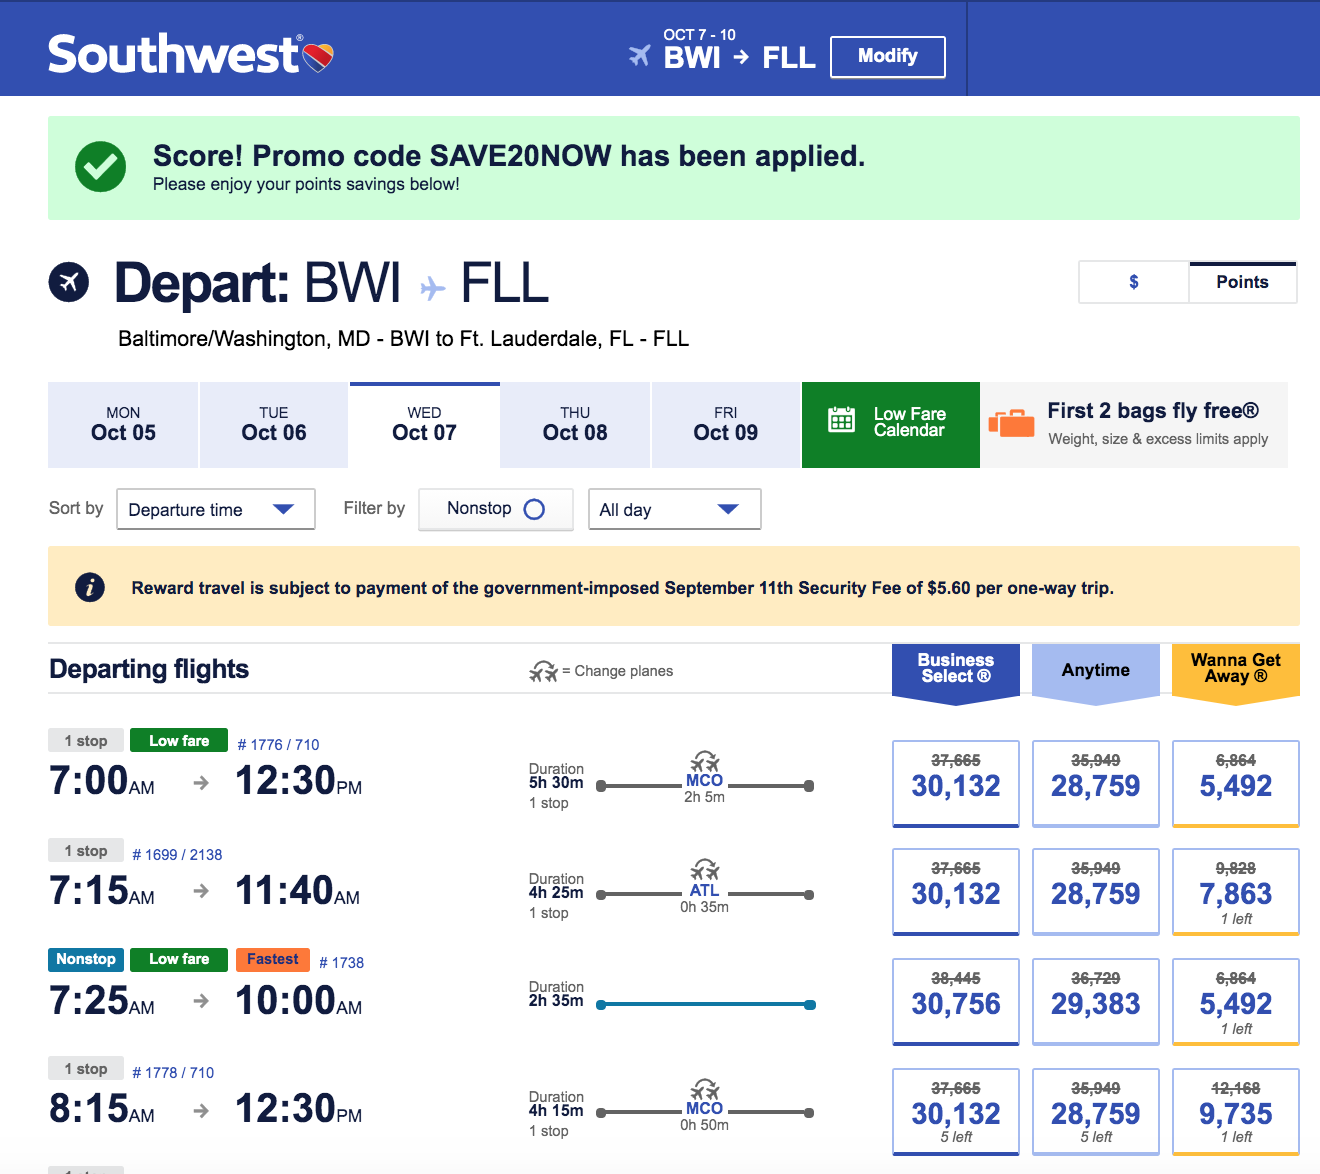 Book Now! Southwest is offering a 20 discount on all flights booked